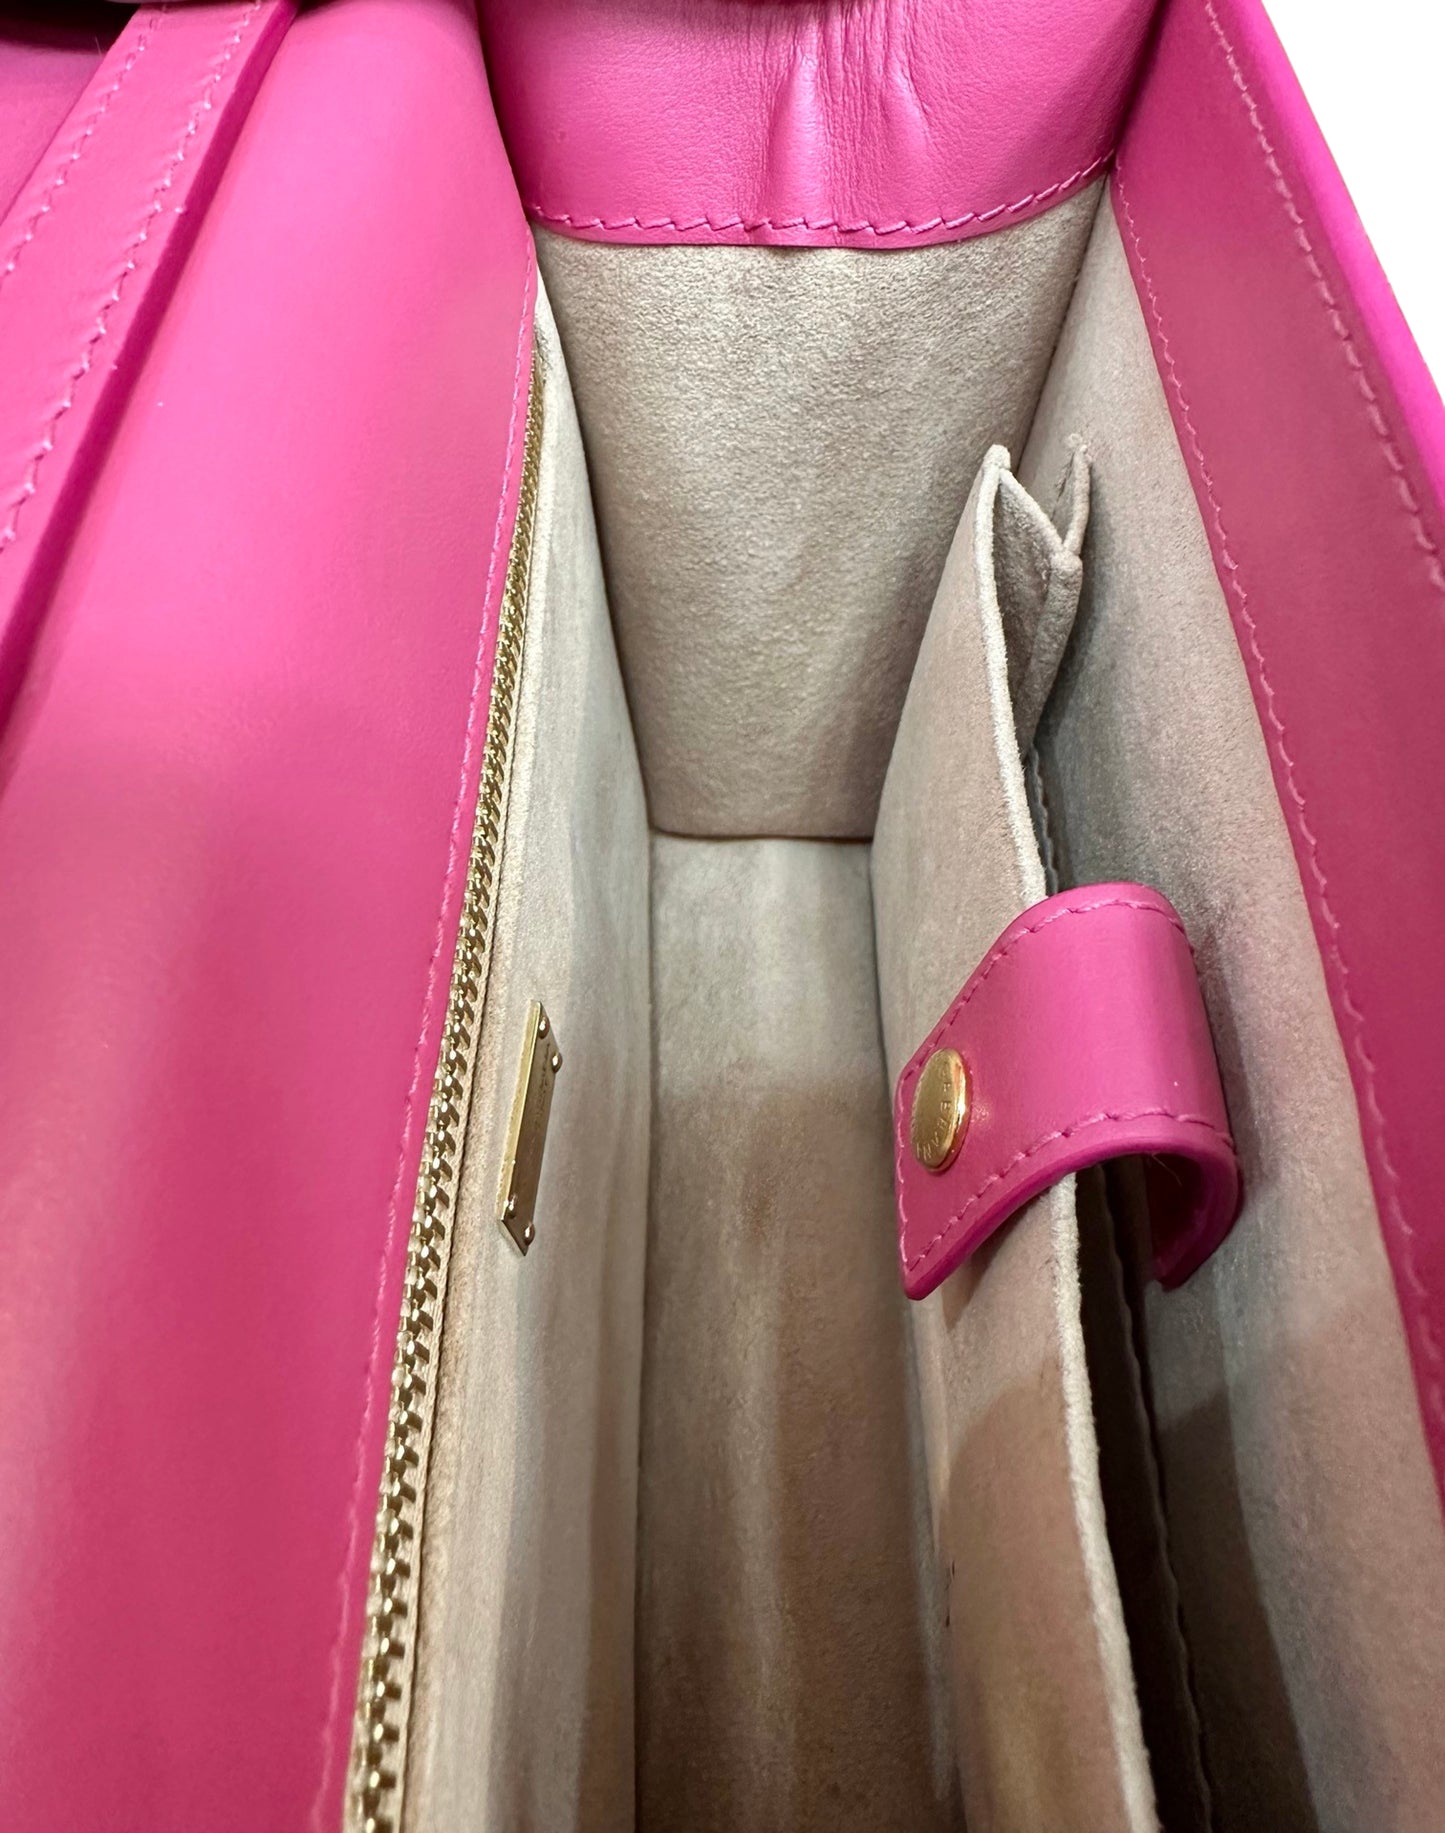 Photo showing the sides of the interior bag